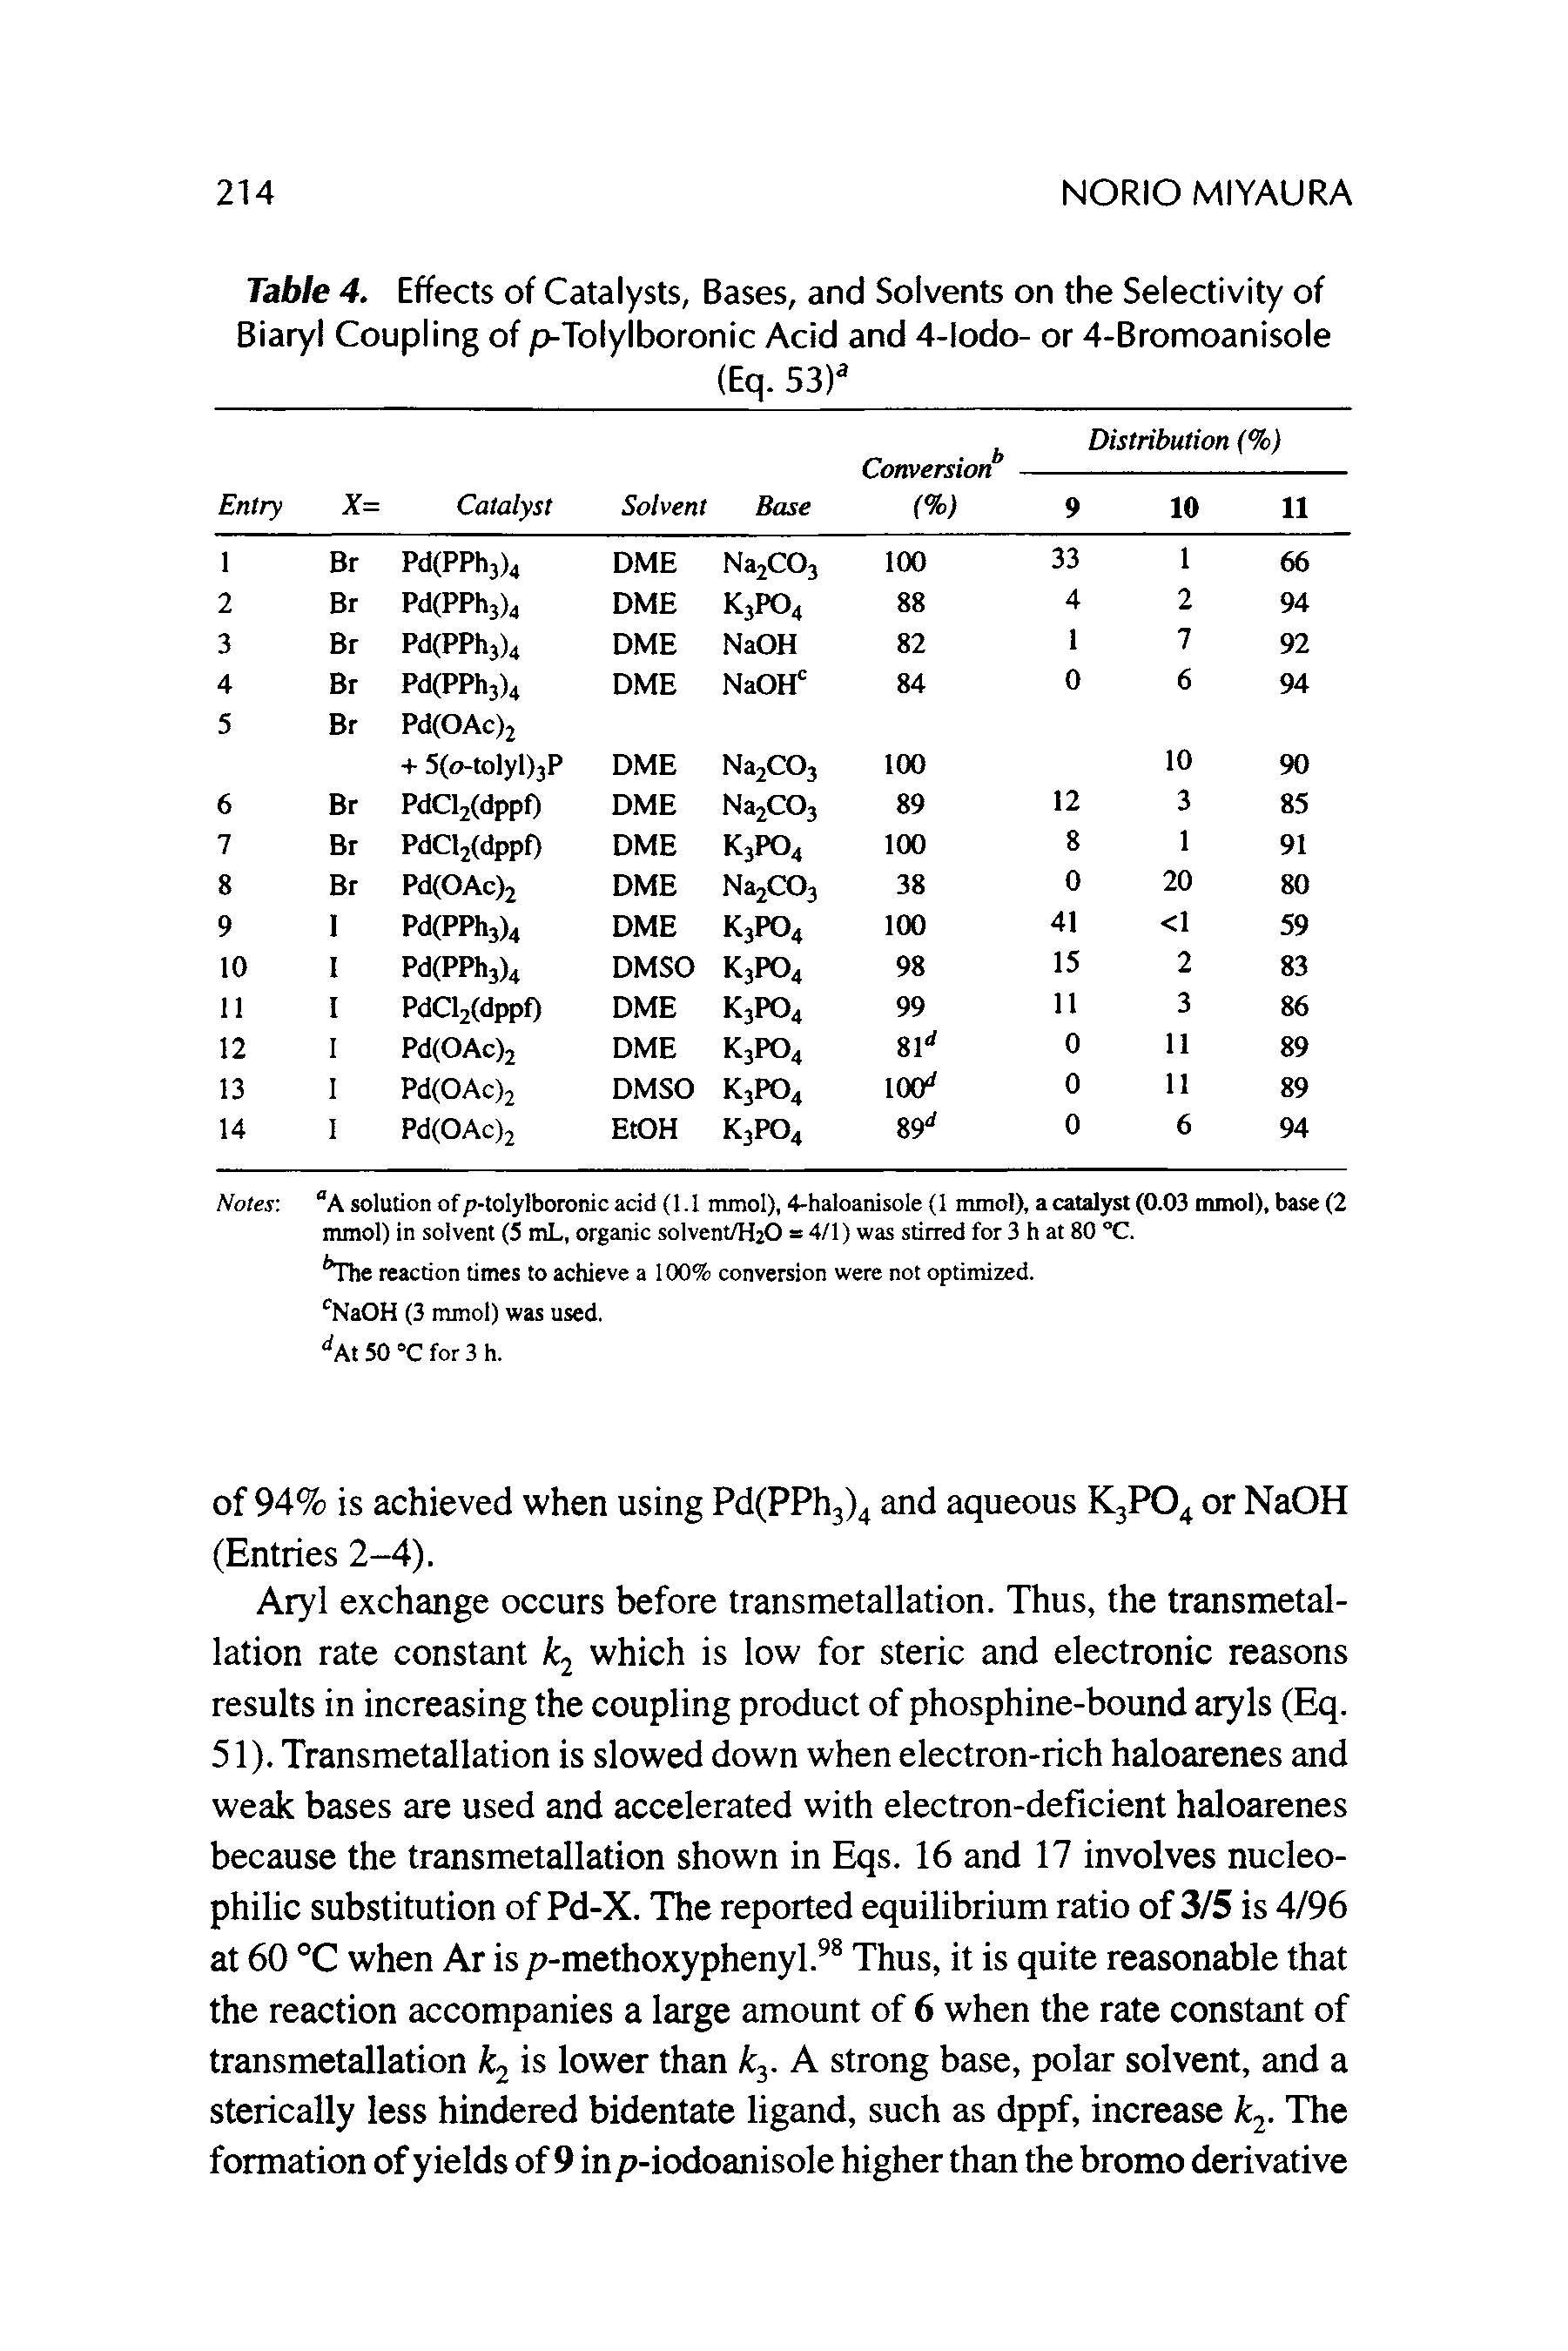 Table 4. Effects of Catalysts, Bases, and Solvents on the Selectivity of Biaryl Coupling of p-Tolylboronic Acid and 4-lodo- or 4-Bromoanisole...